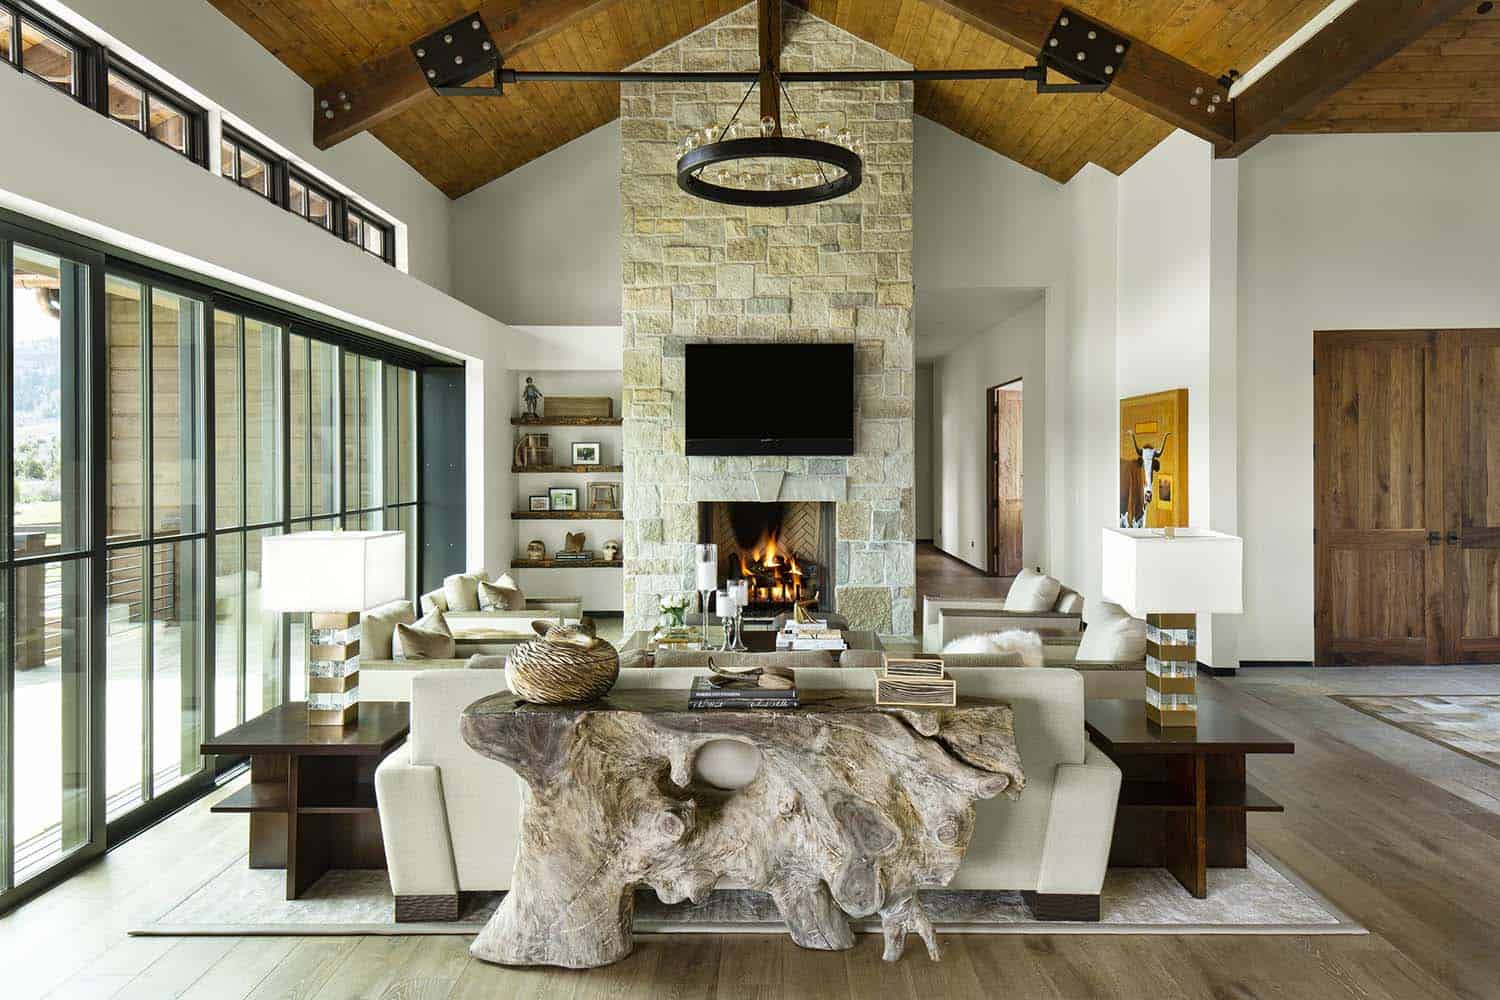 Modern home with rustic touches provides oasis in the